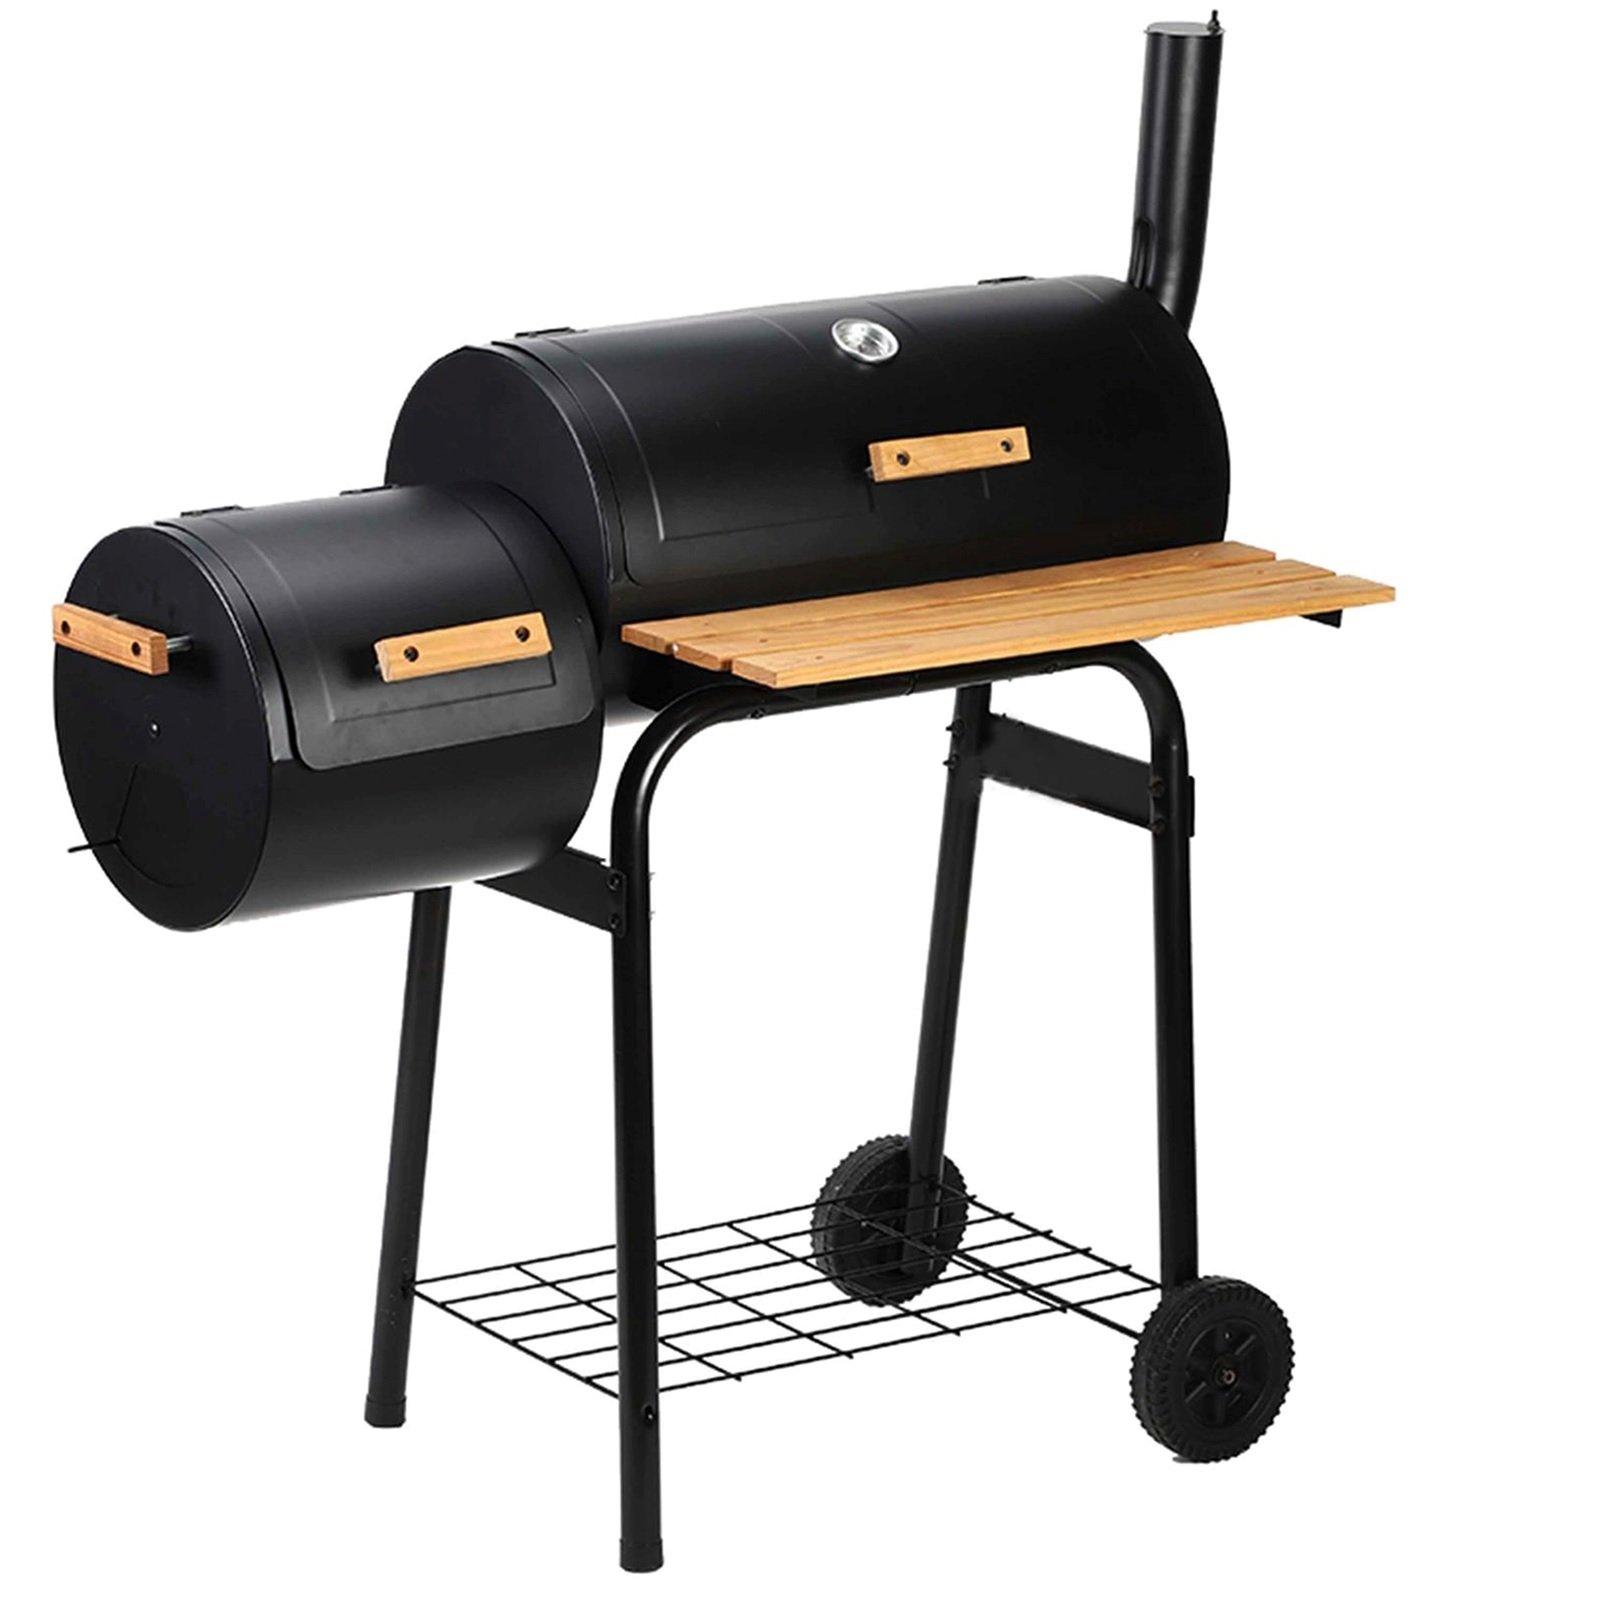 Large Charcoal Barrel BBQ Grill Barbecue Smoker